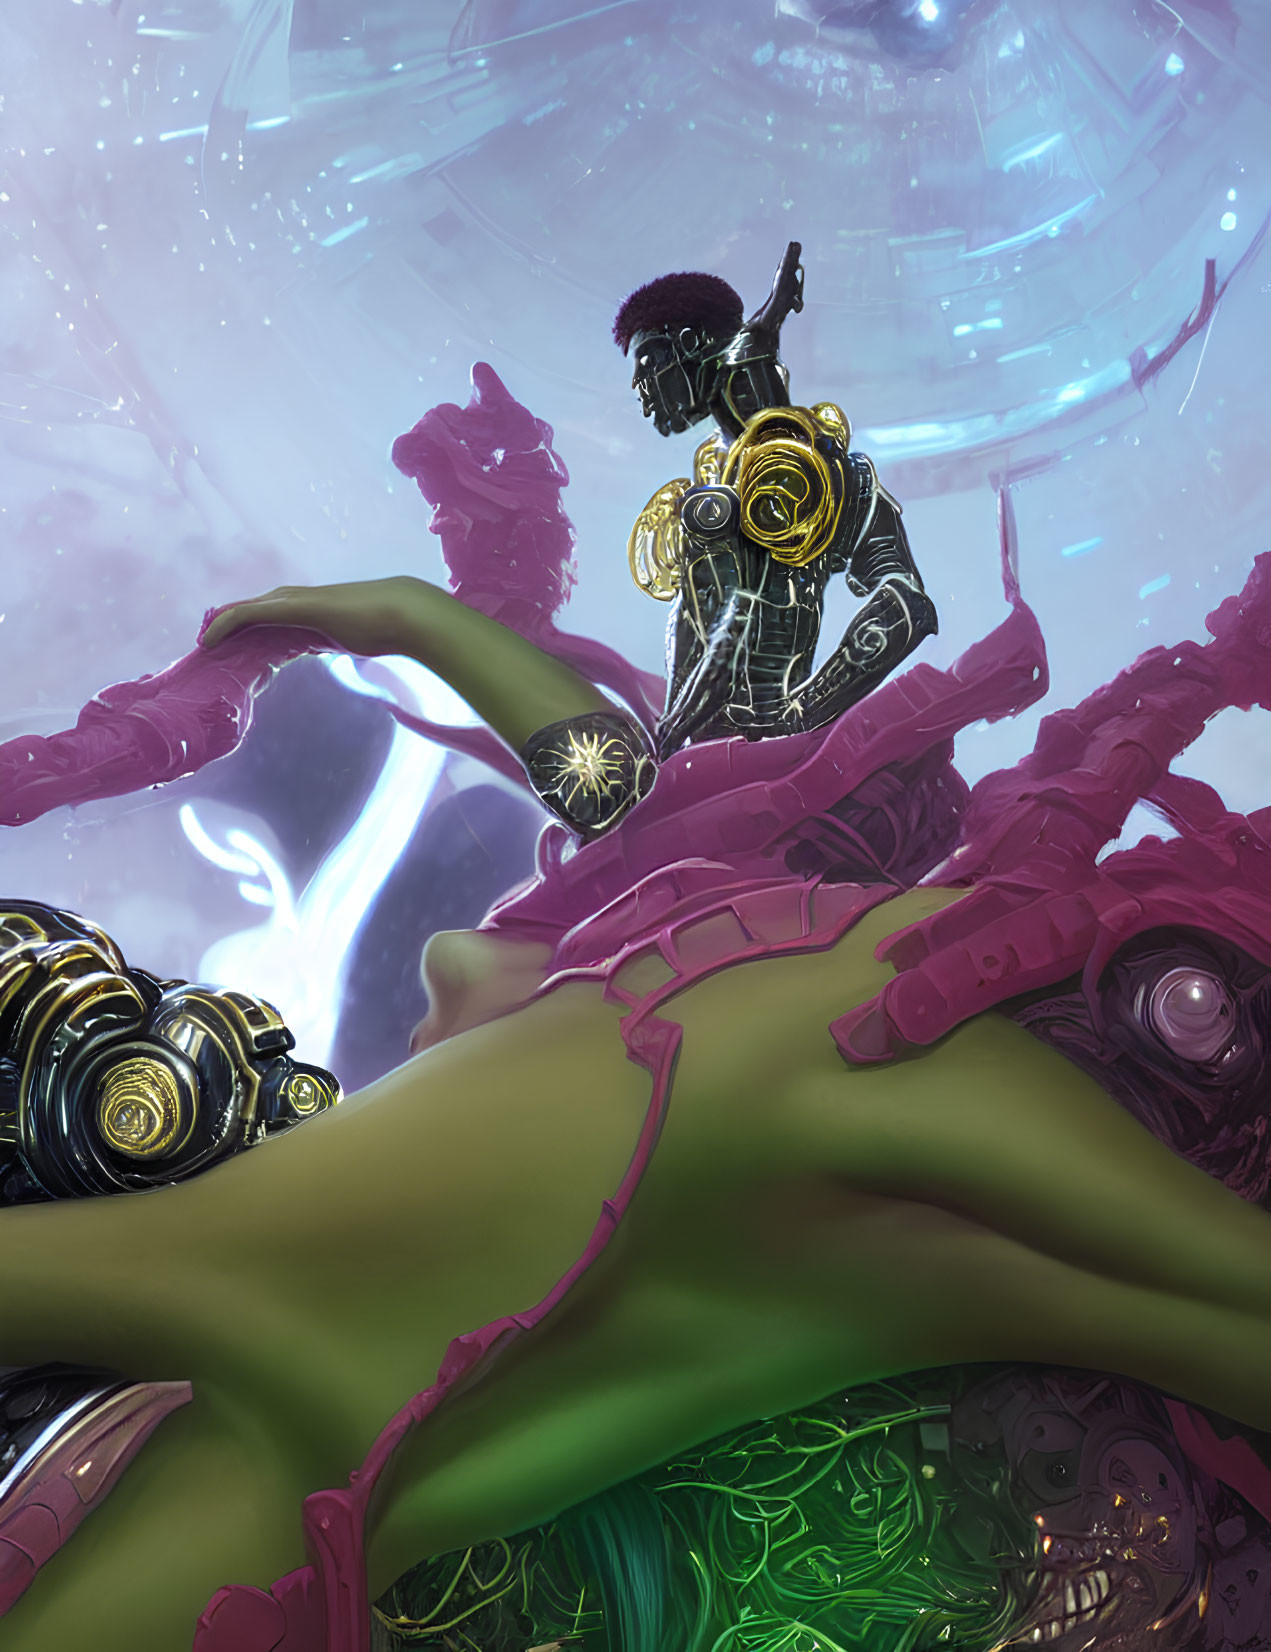 Futuristic warrior in black and gold armor on organic pink structures with cosmic backdrop.